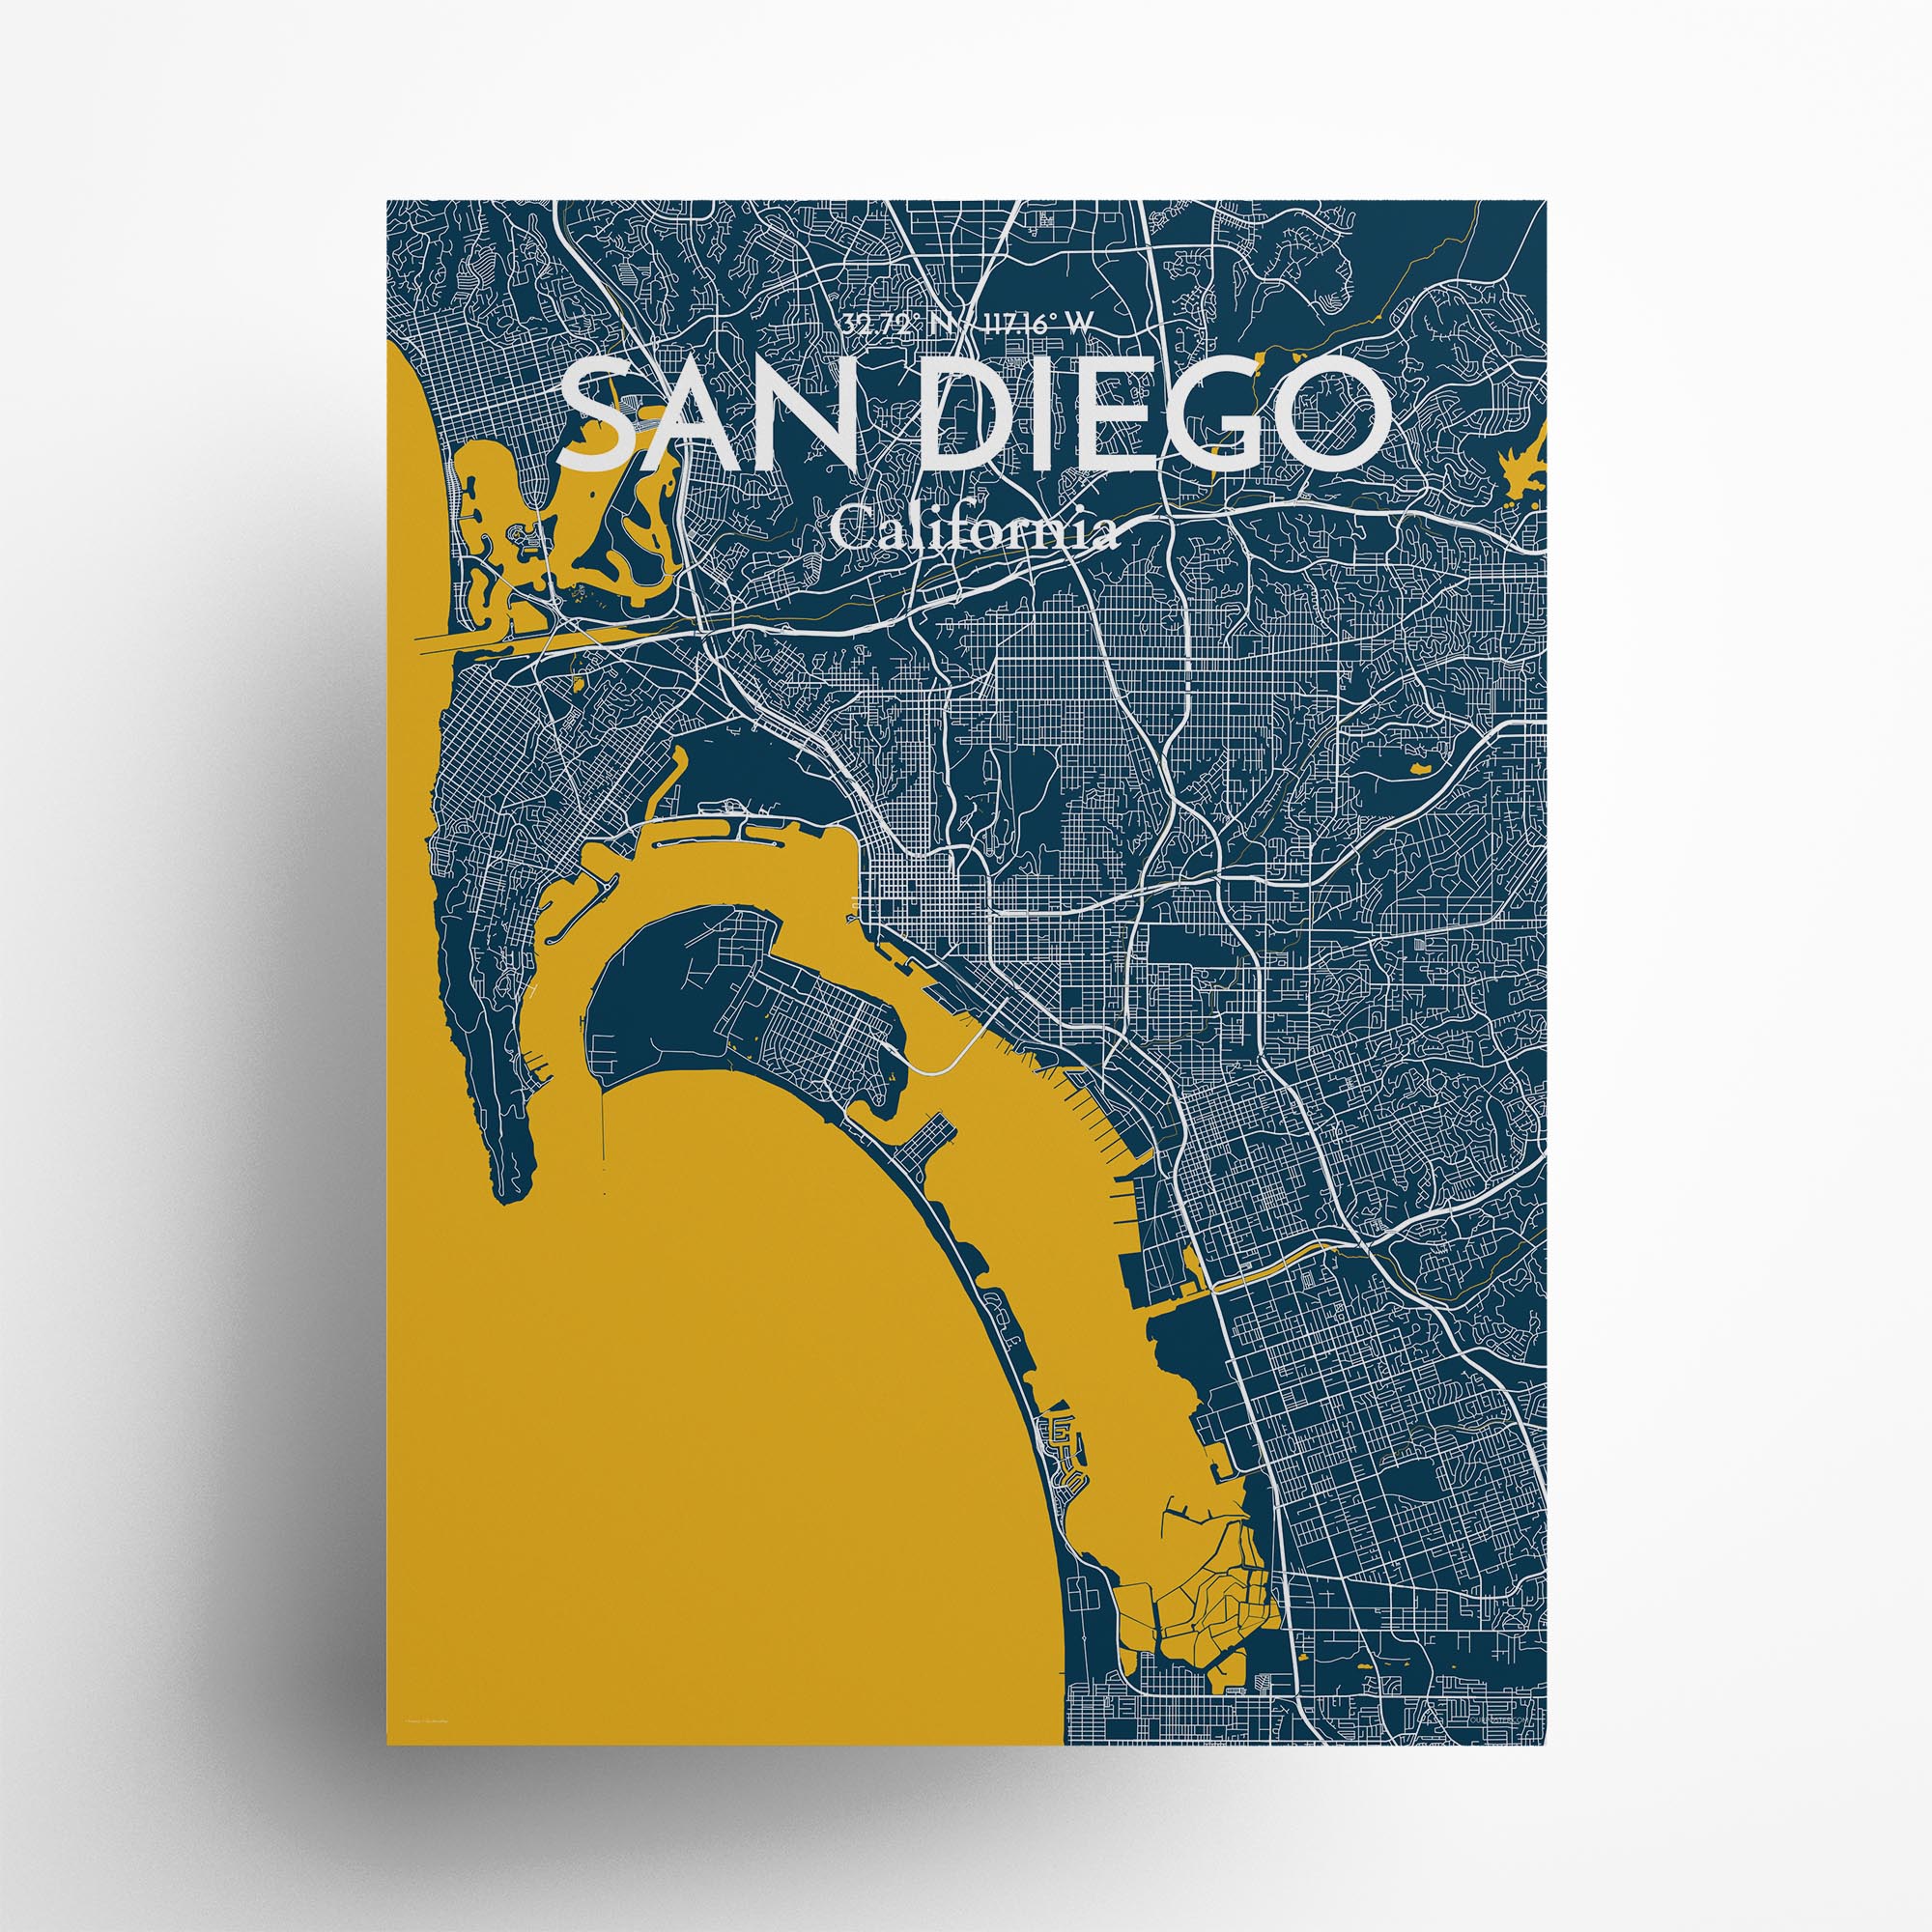 San Diego city map poster in Amuse of size 18" x 24"